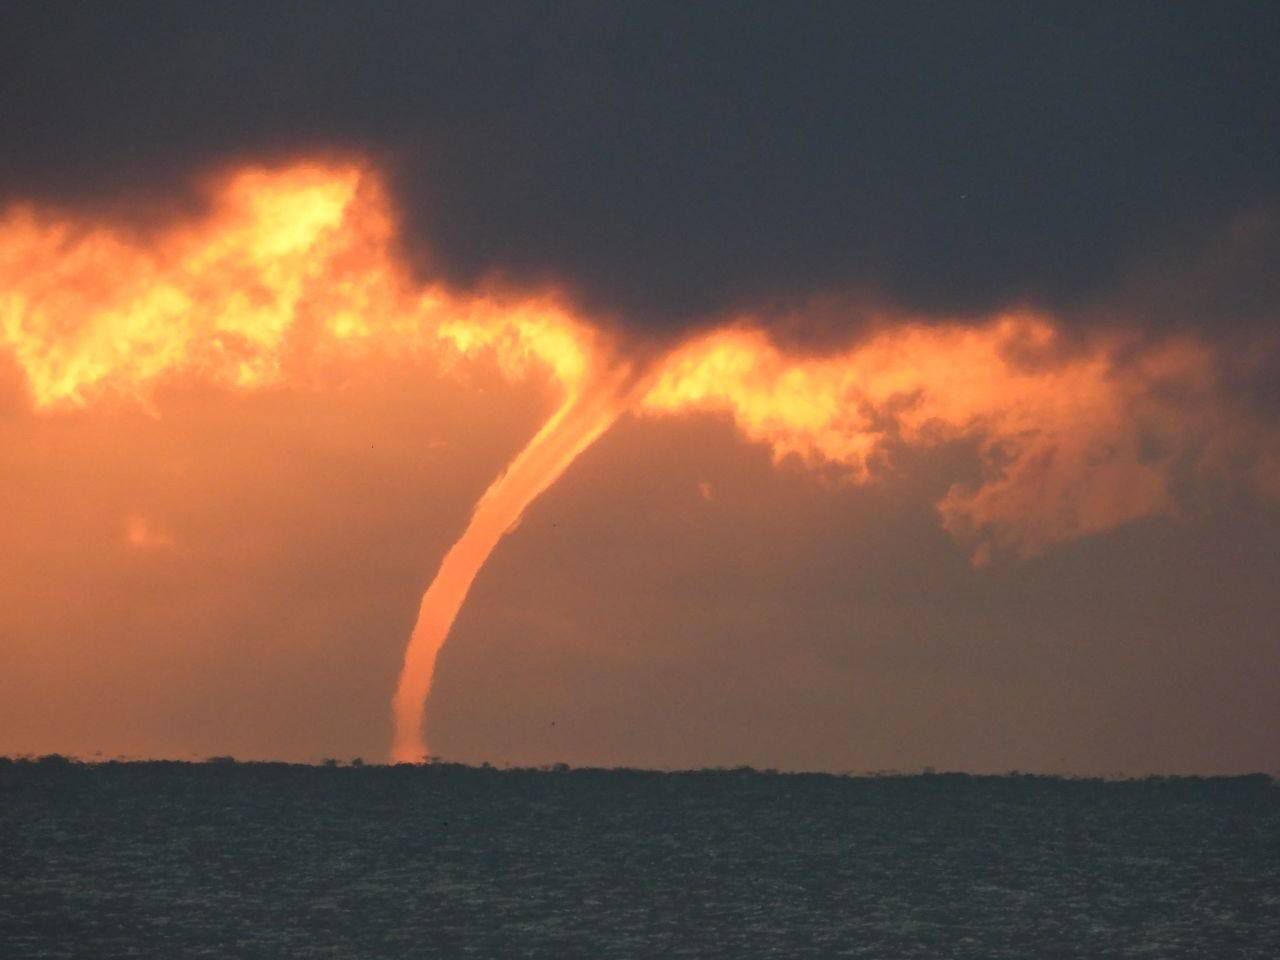 Waterspout over Lake Erie, off of Lorain, Ohio